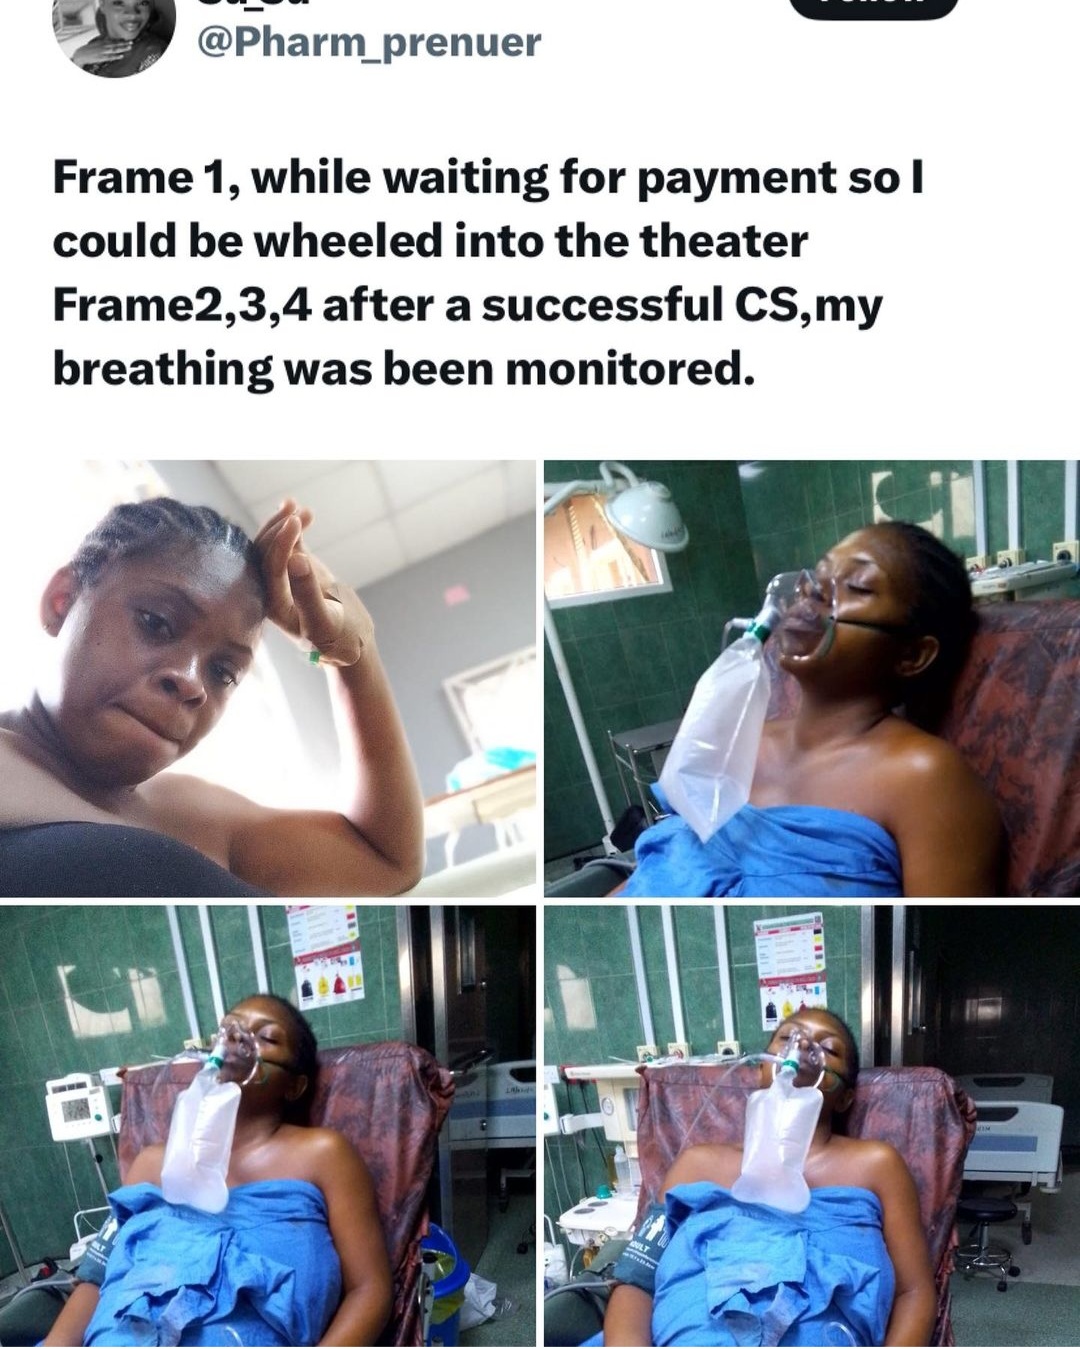 Woman cries for help after husband allegedly abandoned her in a Lagos hospital and 